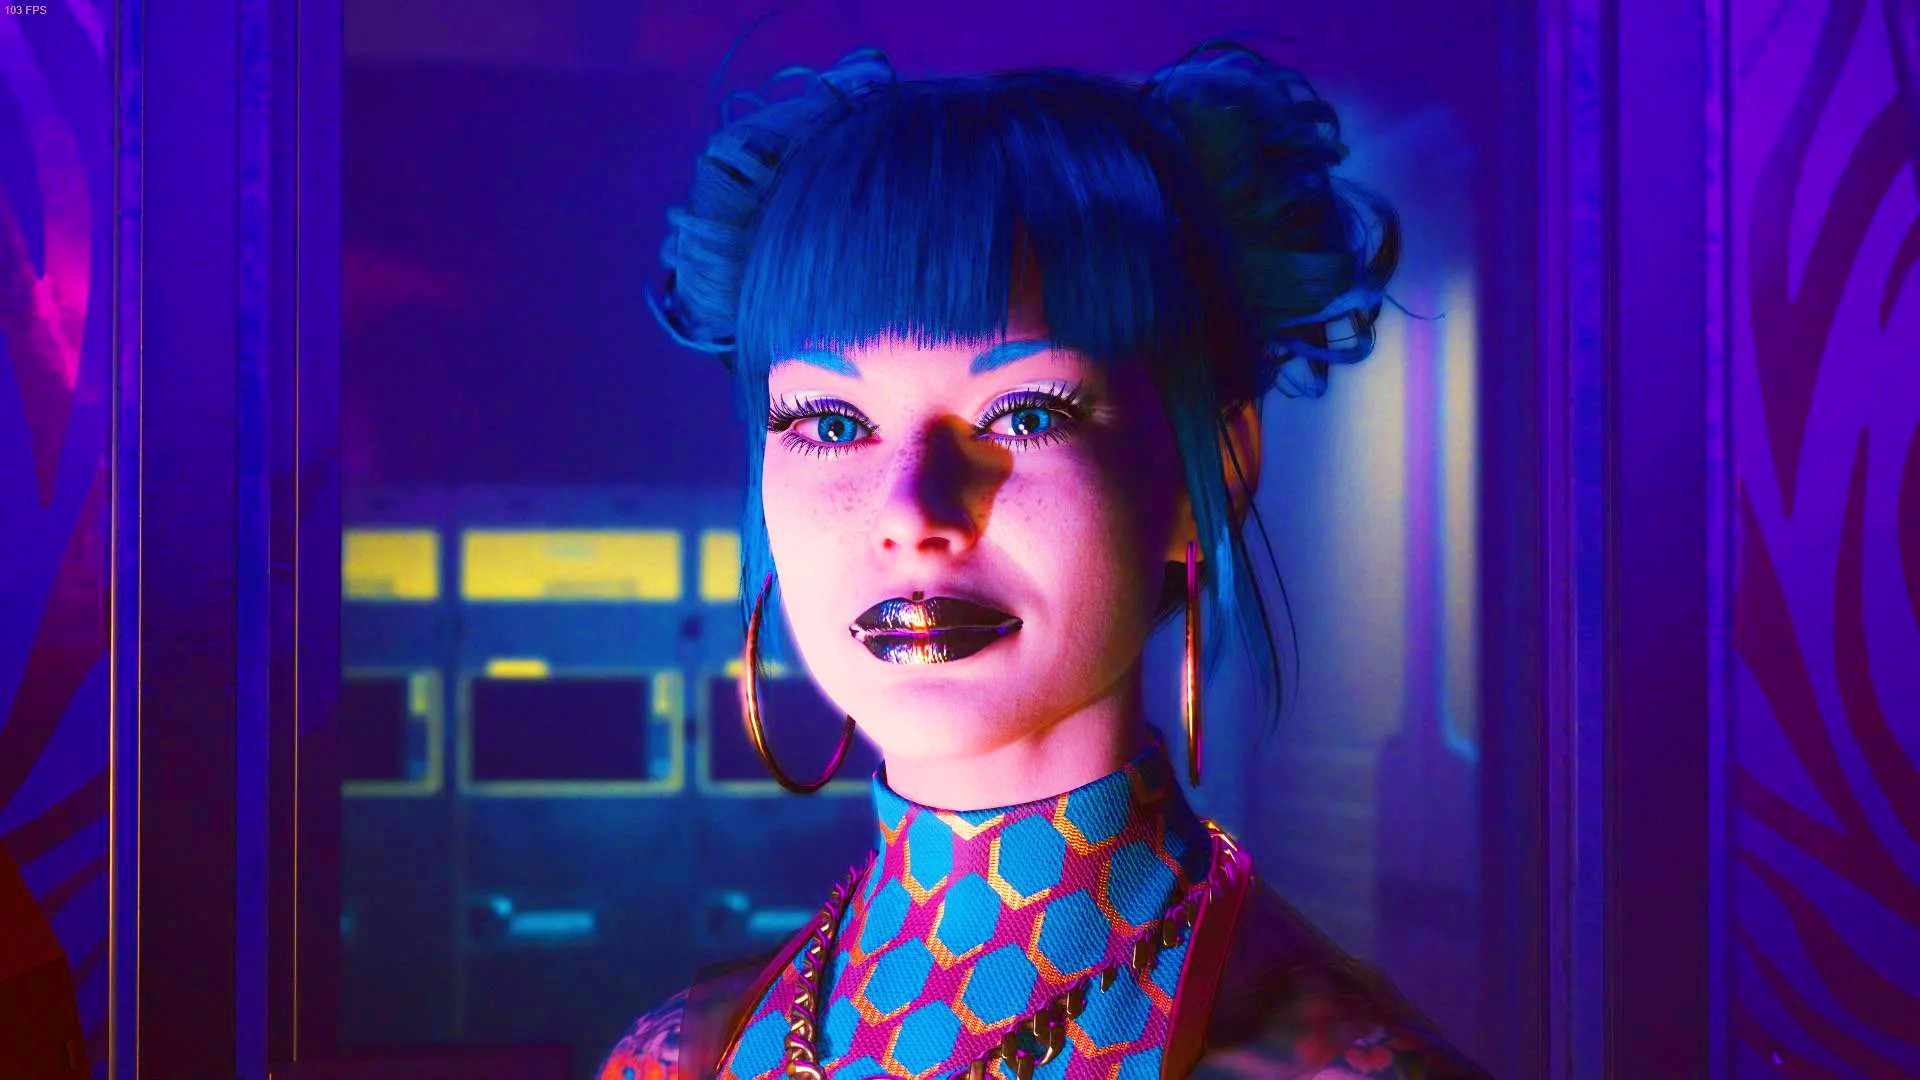 Cyberpunk 2077 bugs might not be CDPR's fault, claims whistleblower